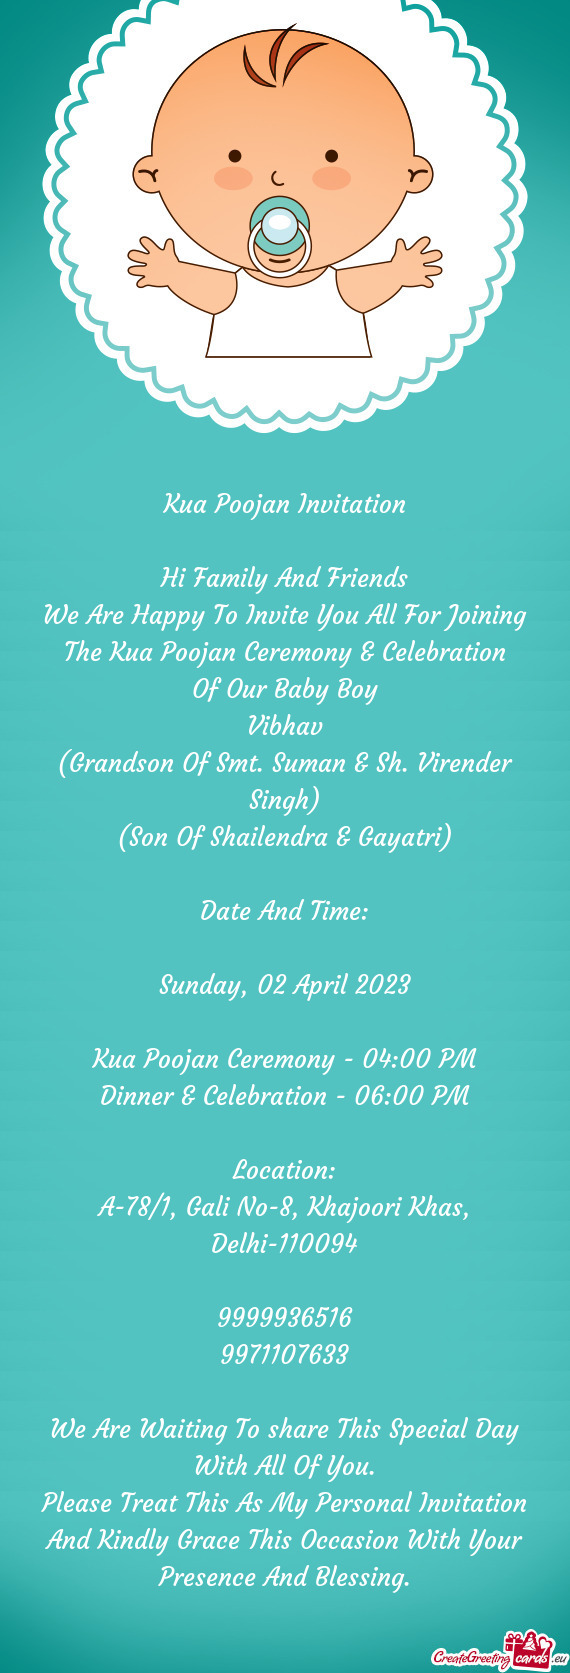 We Are Happy To Invite You All For Joining The Kua Poojan Ceremony & Celebration